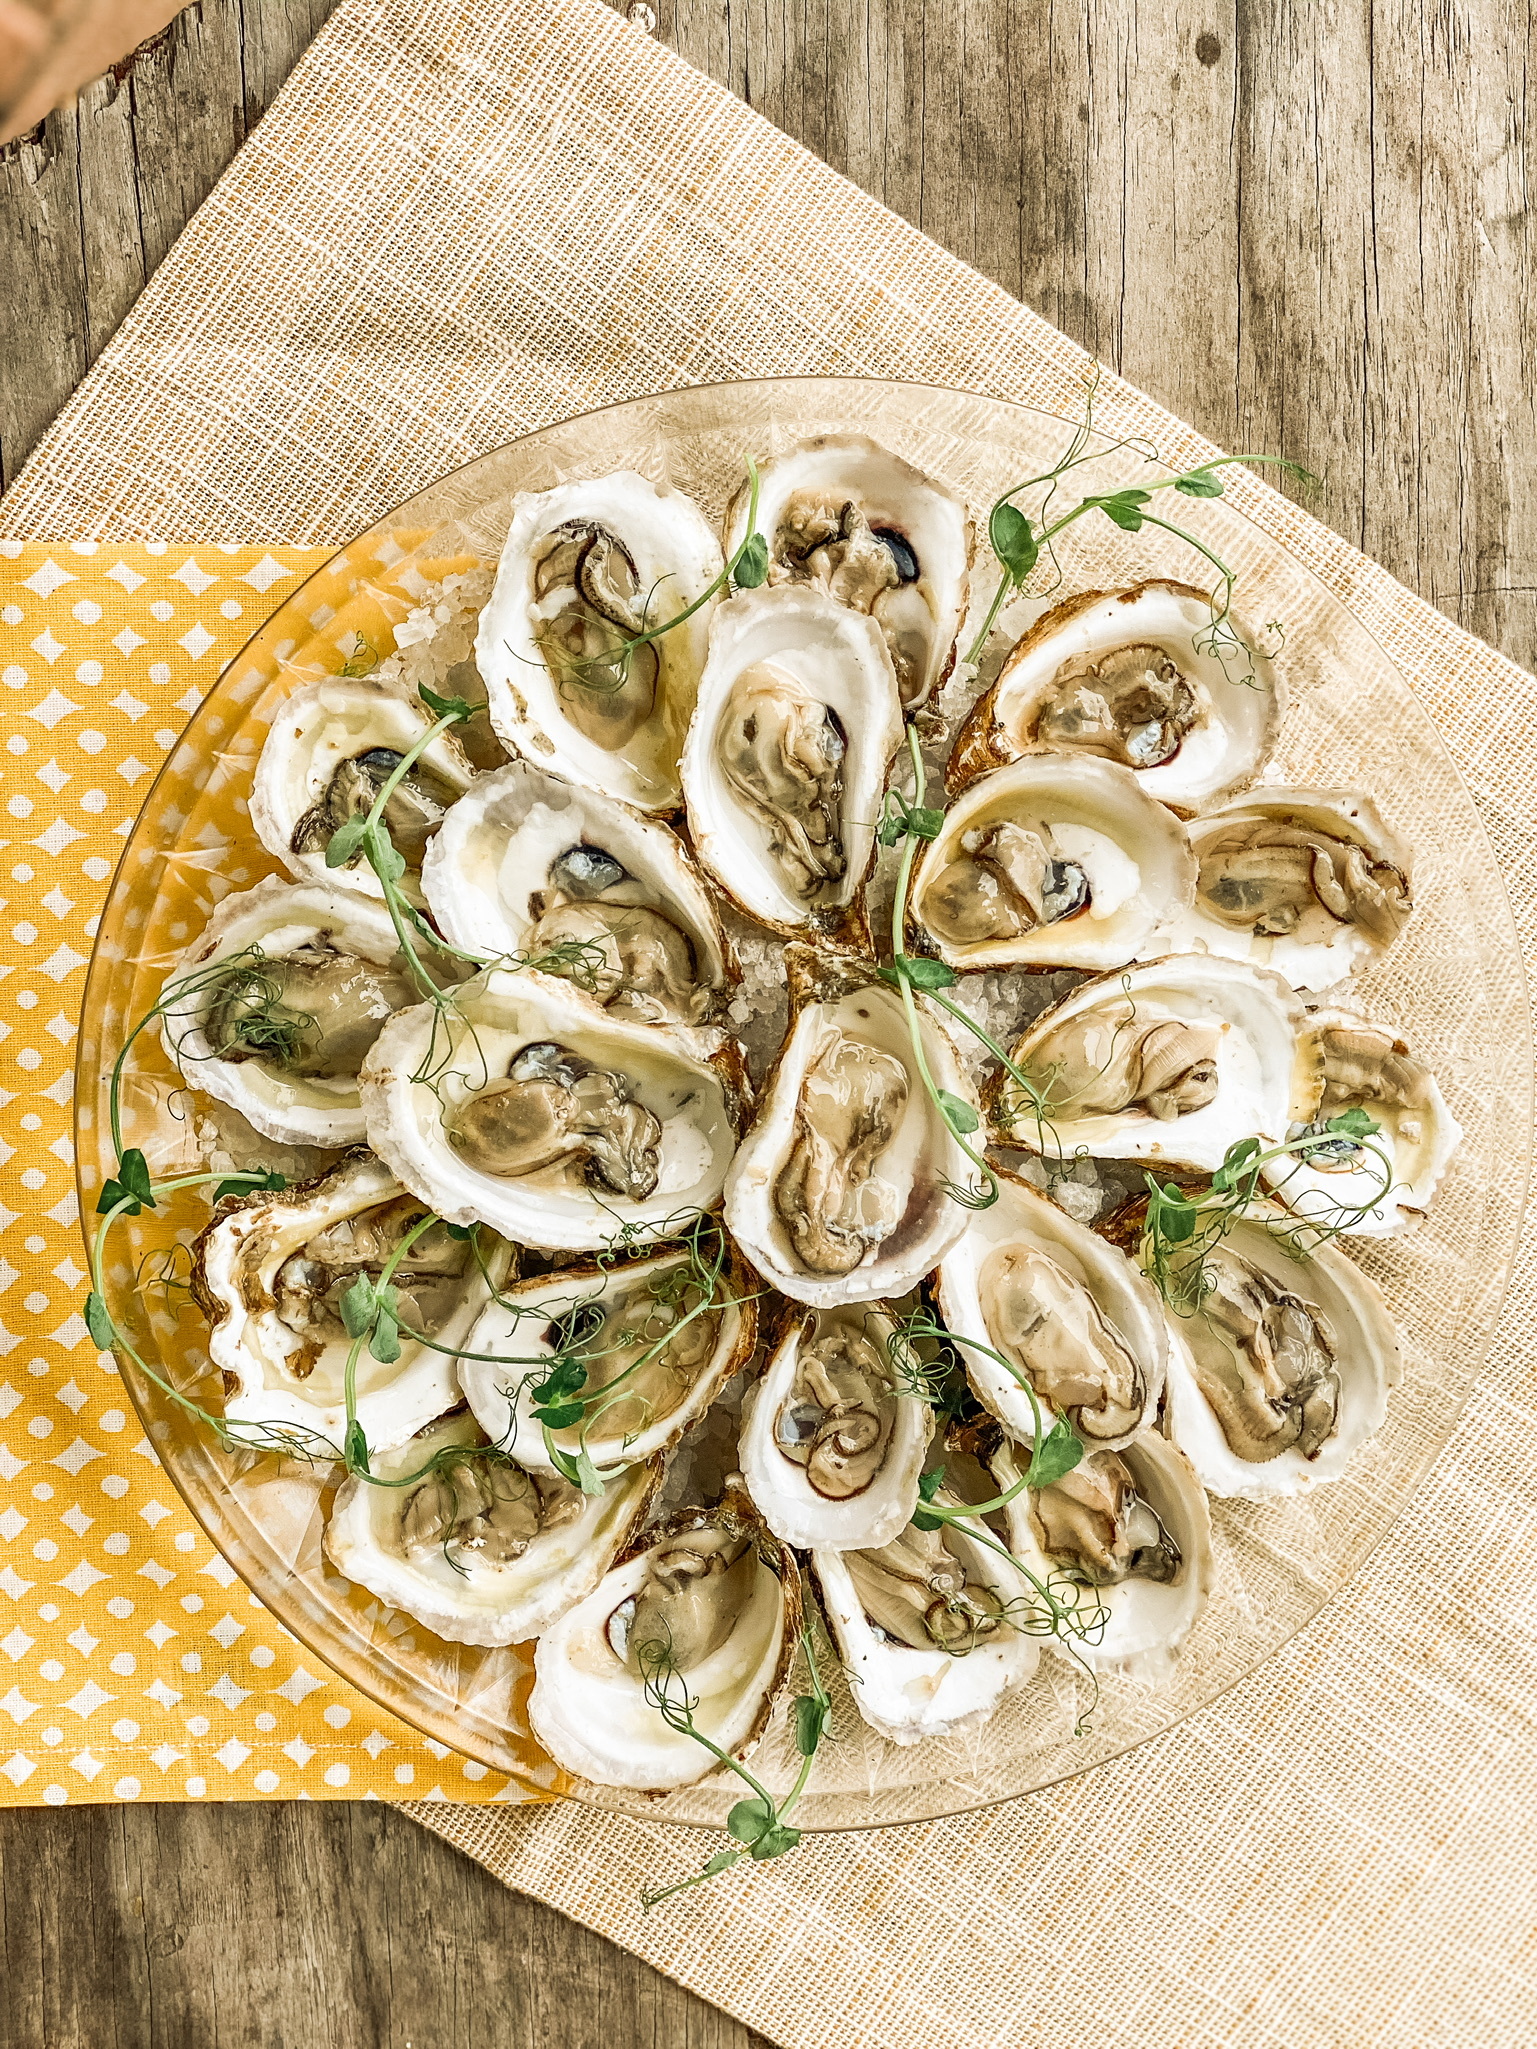 An overhead view of a plate of raw oysters garnished with shaved spring onions.